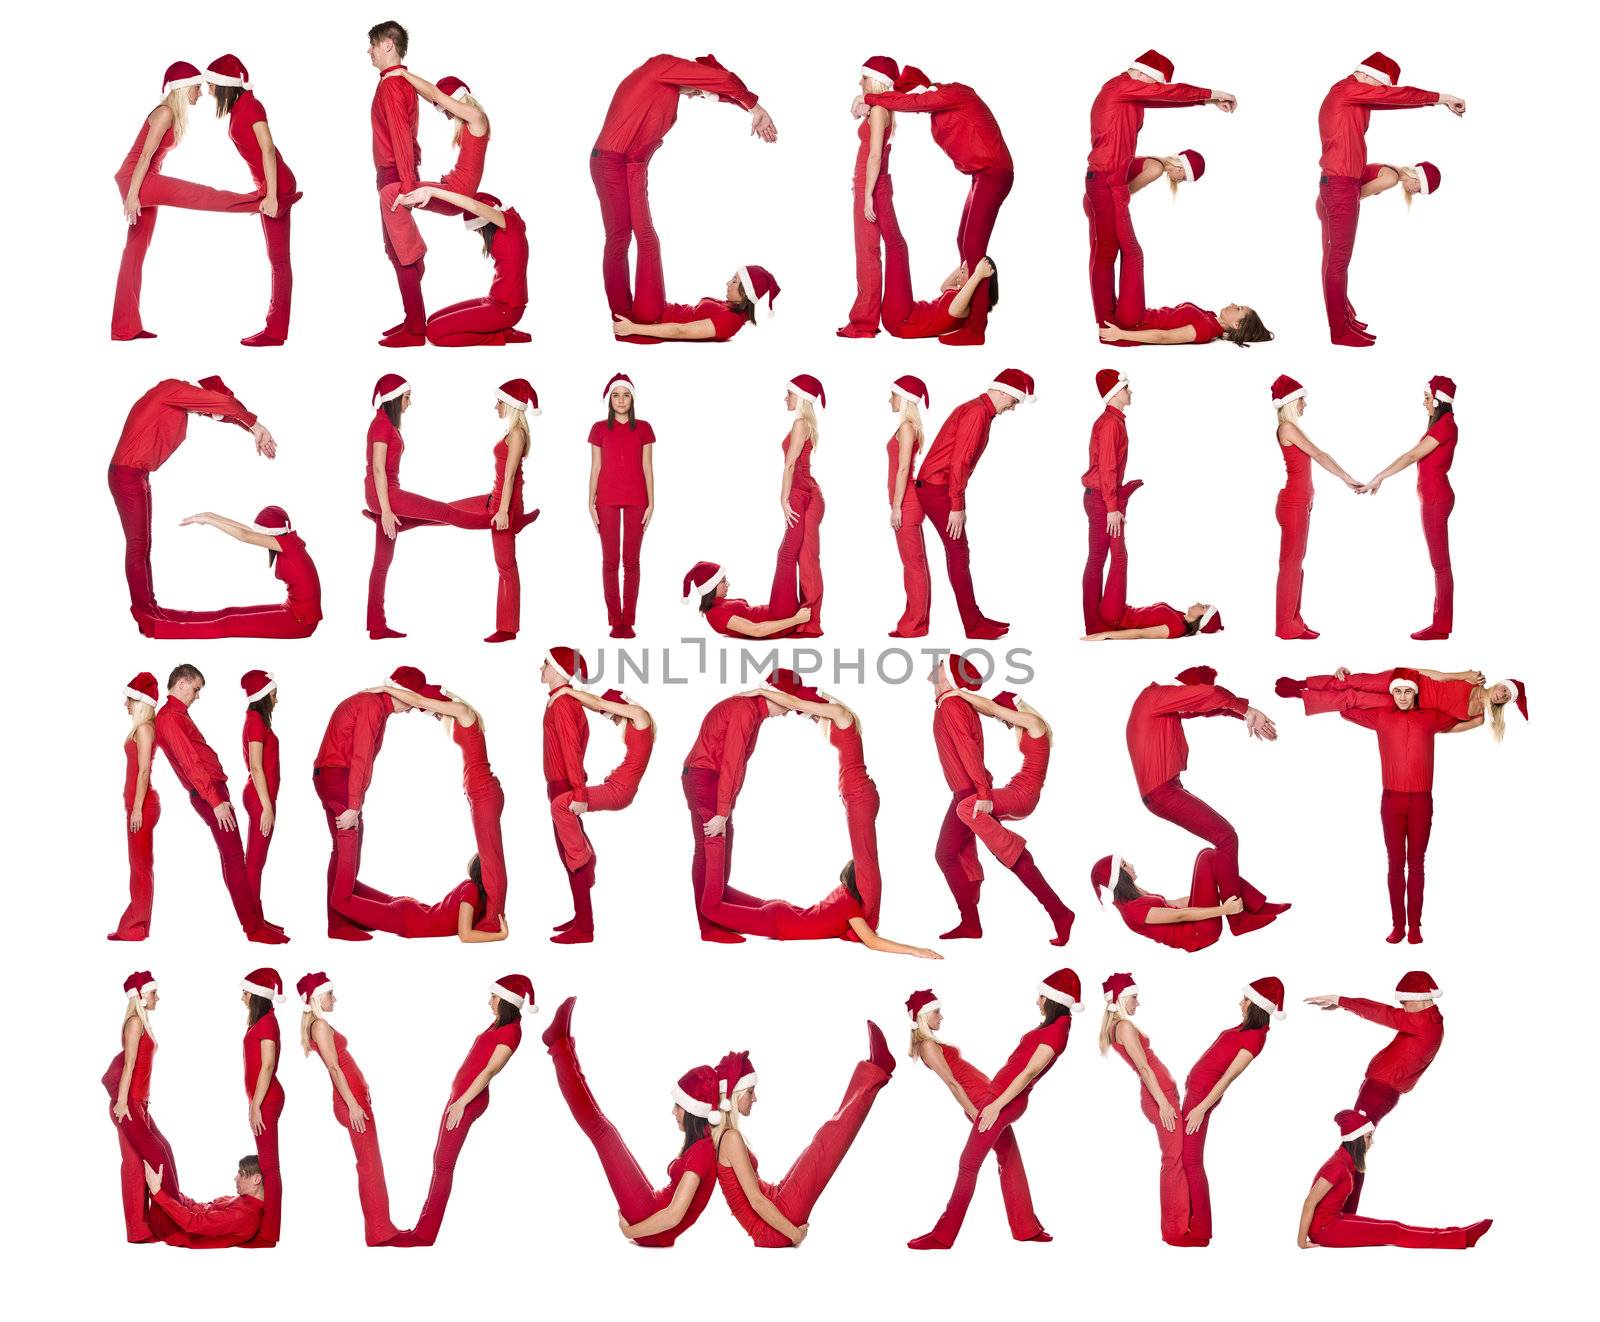 Group of red dressed people forming the alphabet.